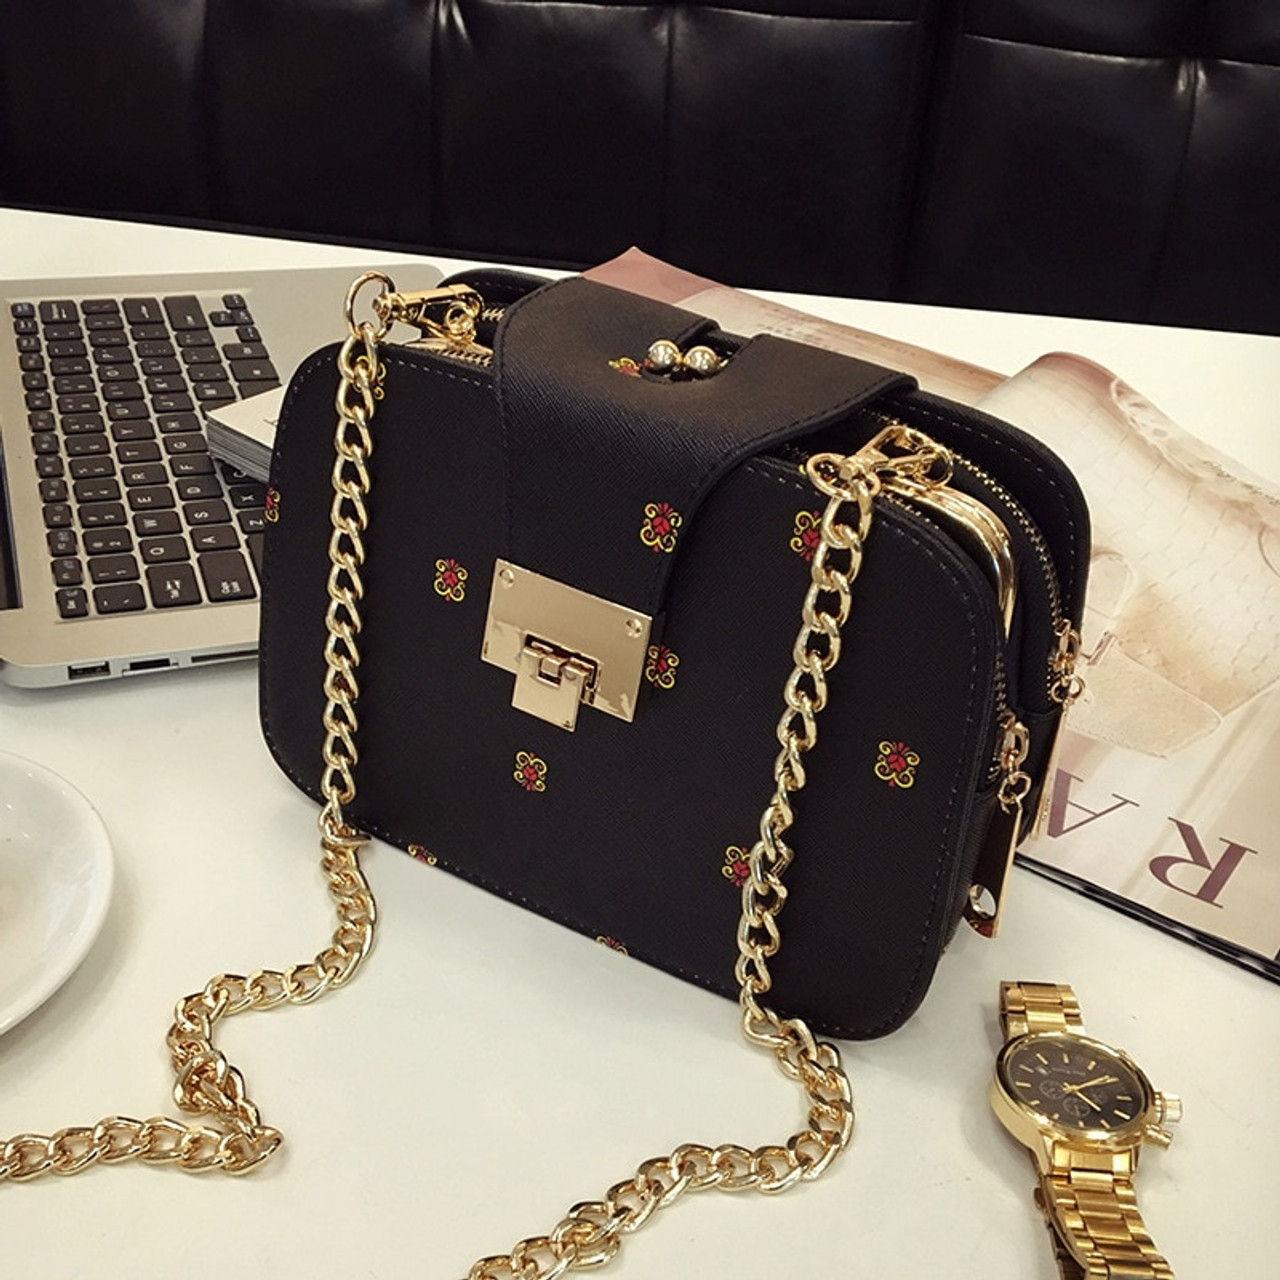 Luxury Designer Long Chain Flap Shoulder Bag With Coin And Lipstick Purse,  Fashionable Crossbody Handbag With Floral Design, Wallets, And Clutch For  Women From Royalronnie, $48.91 | DHgate.Com